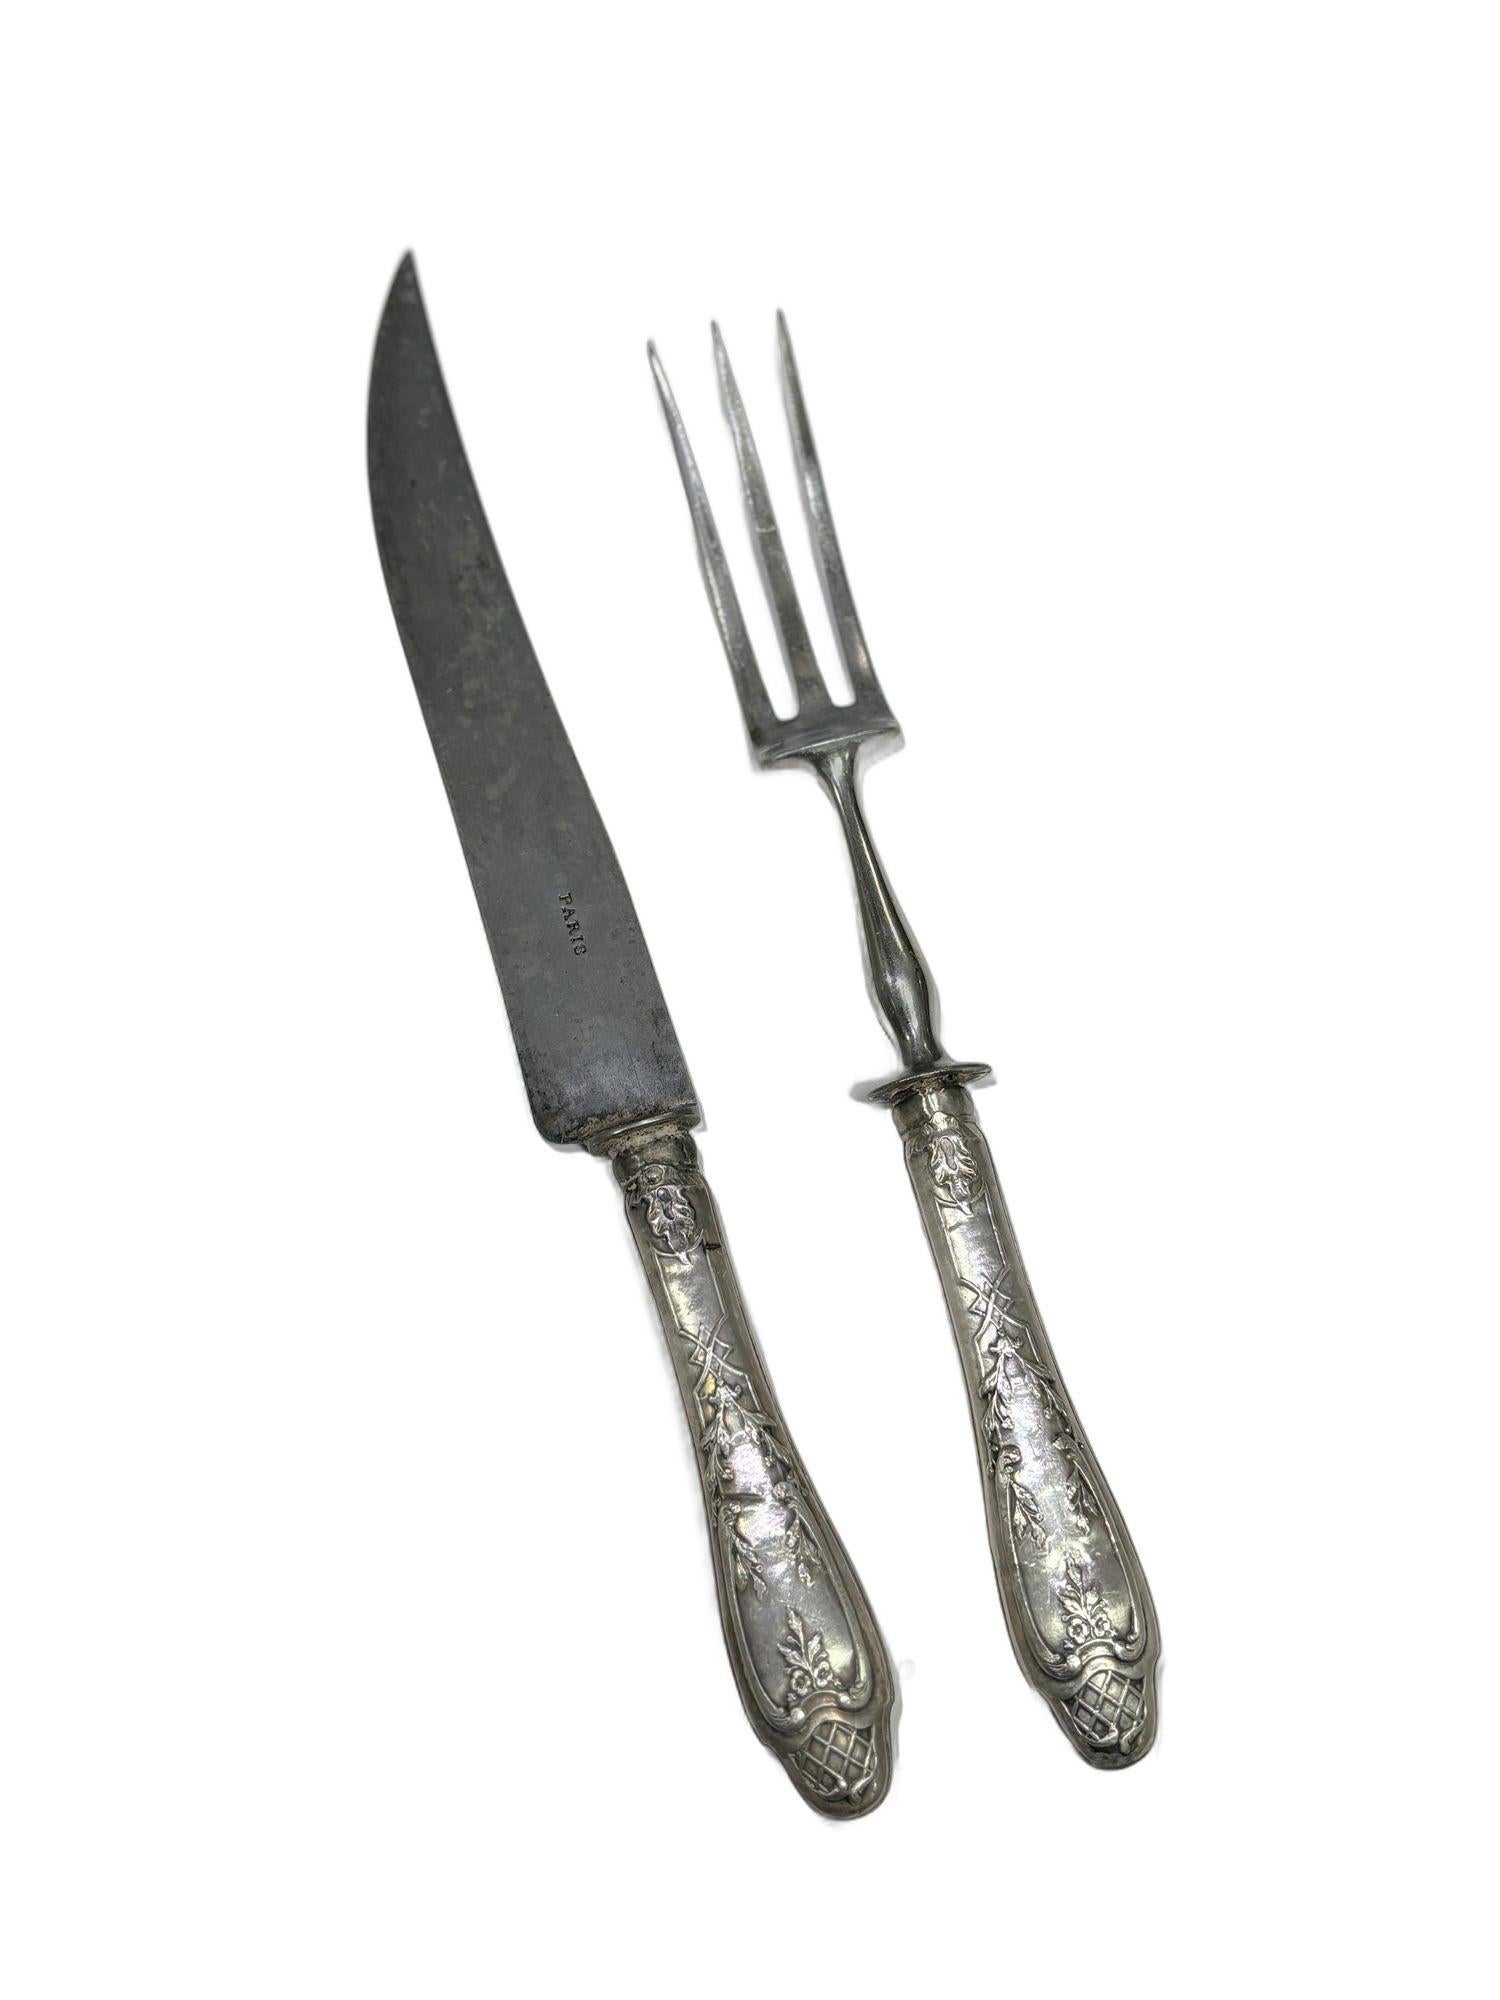 1890's French Neoclassic Repoussé Sterling Silver Serving Meat Fork and Knife For Sale 4